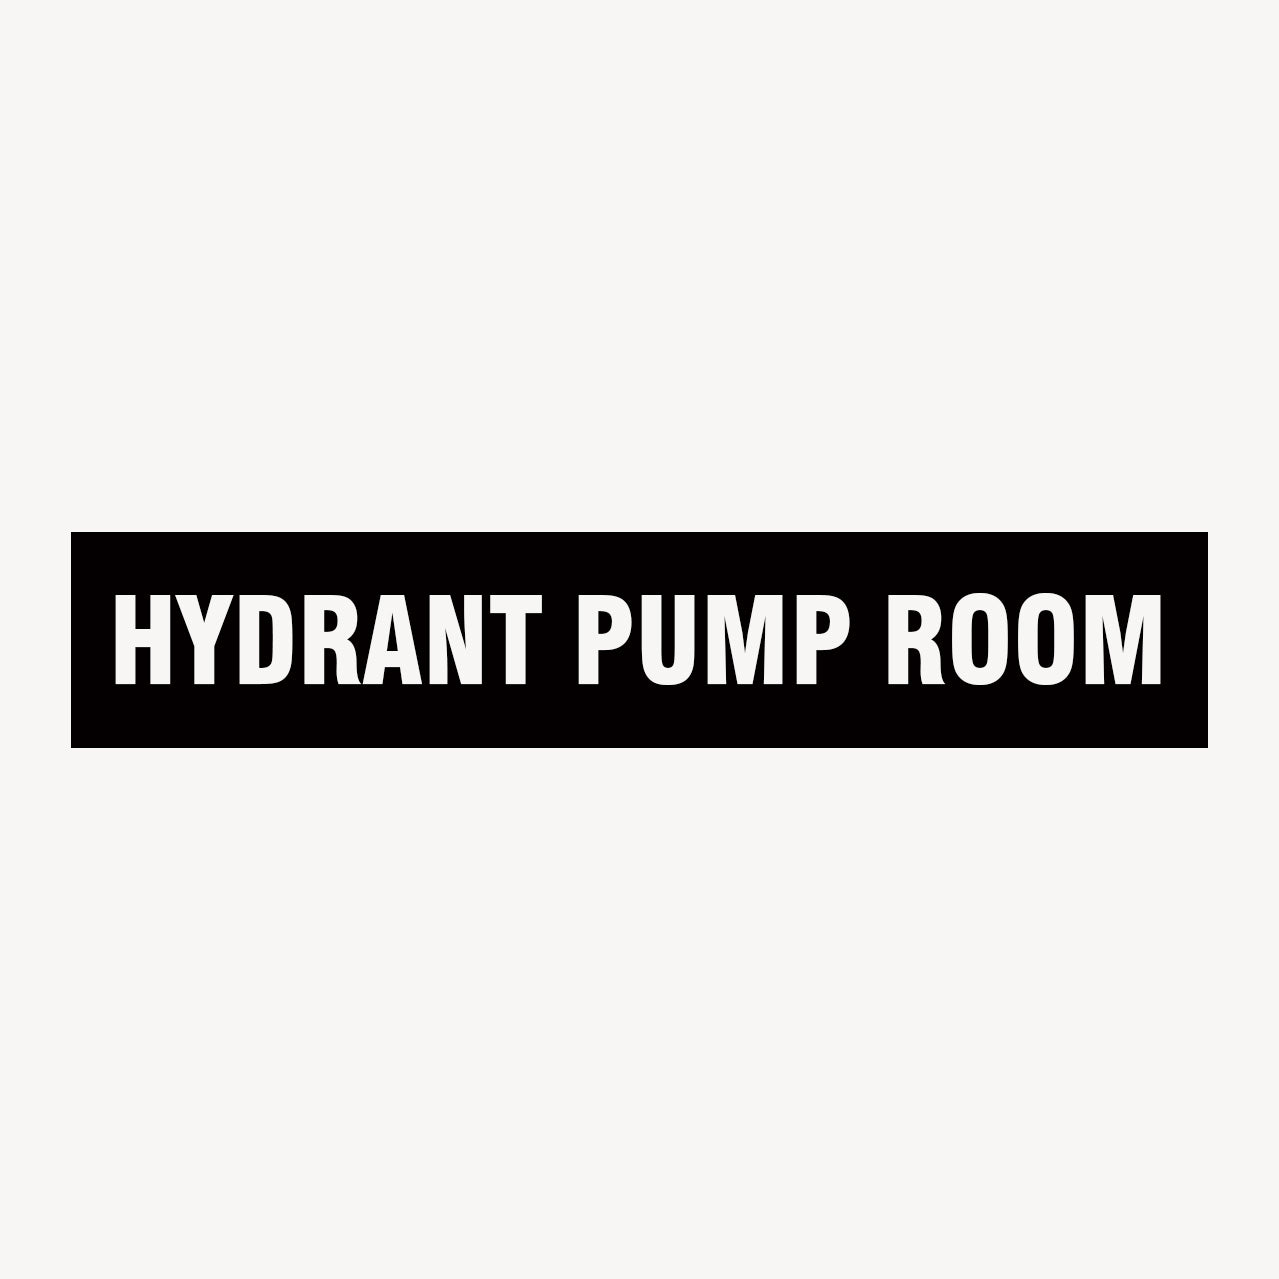 HYDRANT PUMP ROOM SIGN